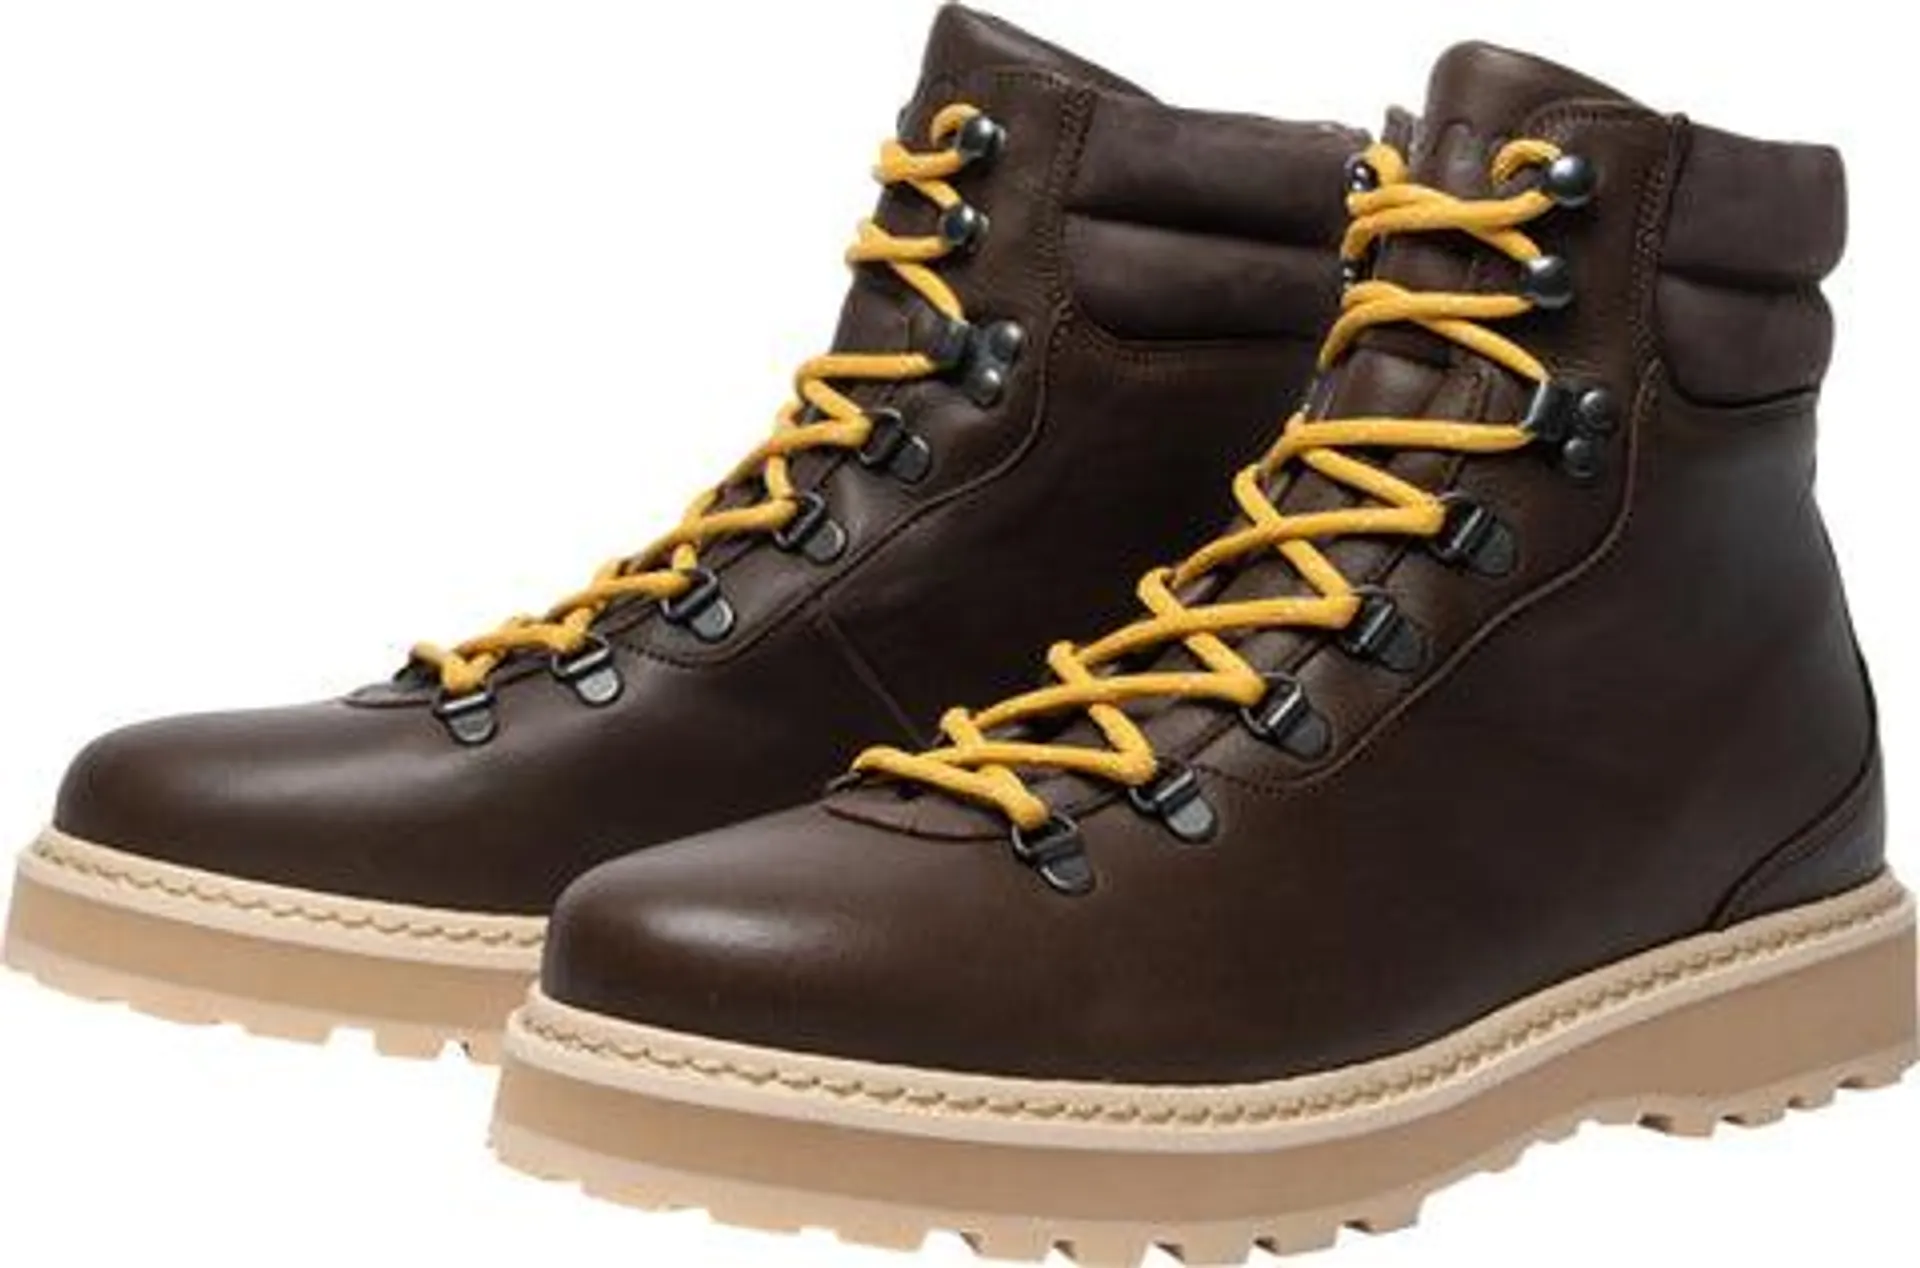 Hiking Flat Leather Shearling Lined Boots - Men's